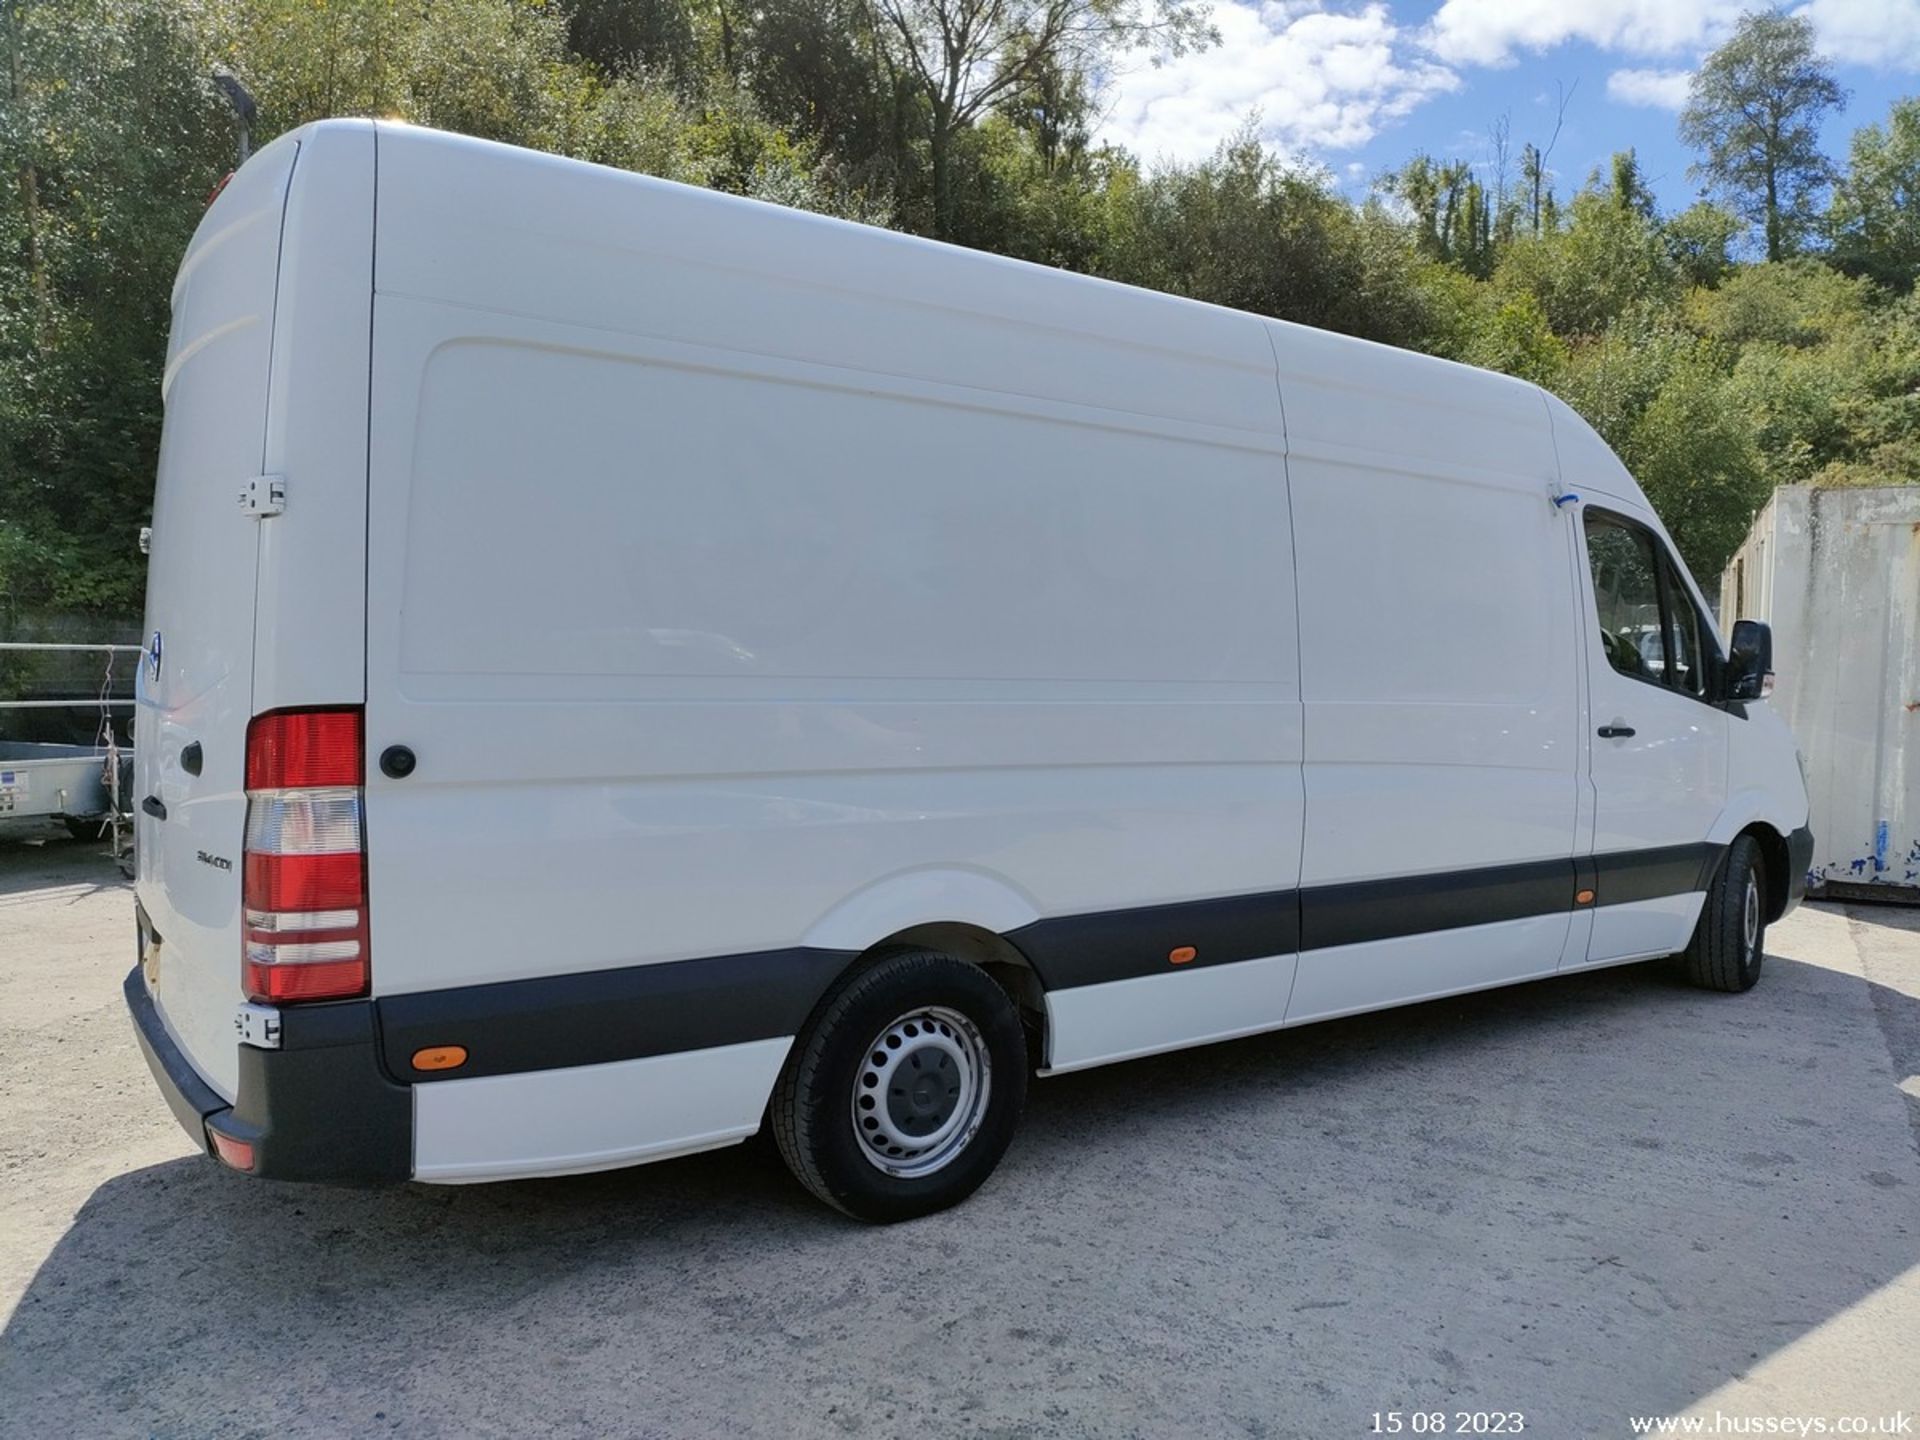 18/68 MERCEDES-BENZ SPRINTER 314CDI - 2143cc 5dr Refrigerated (White) - Image 10 of 40